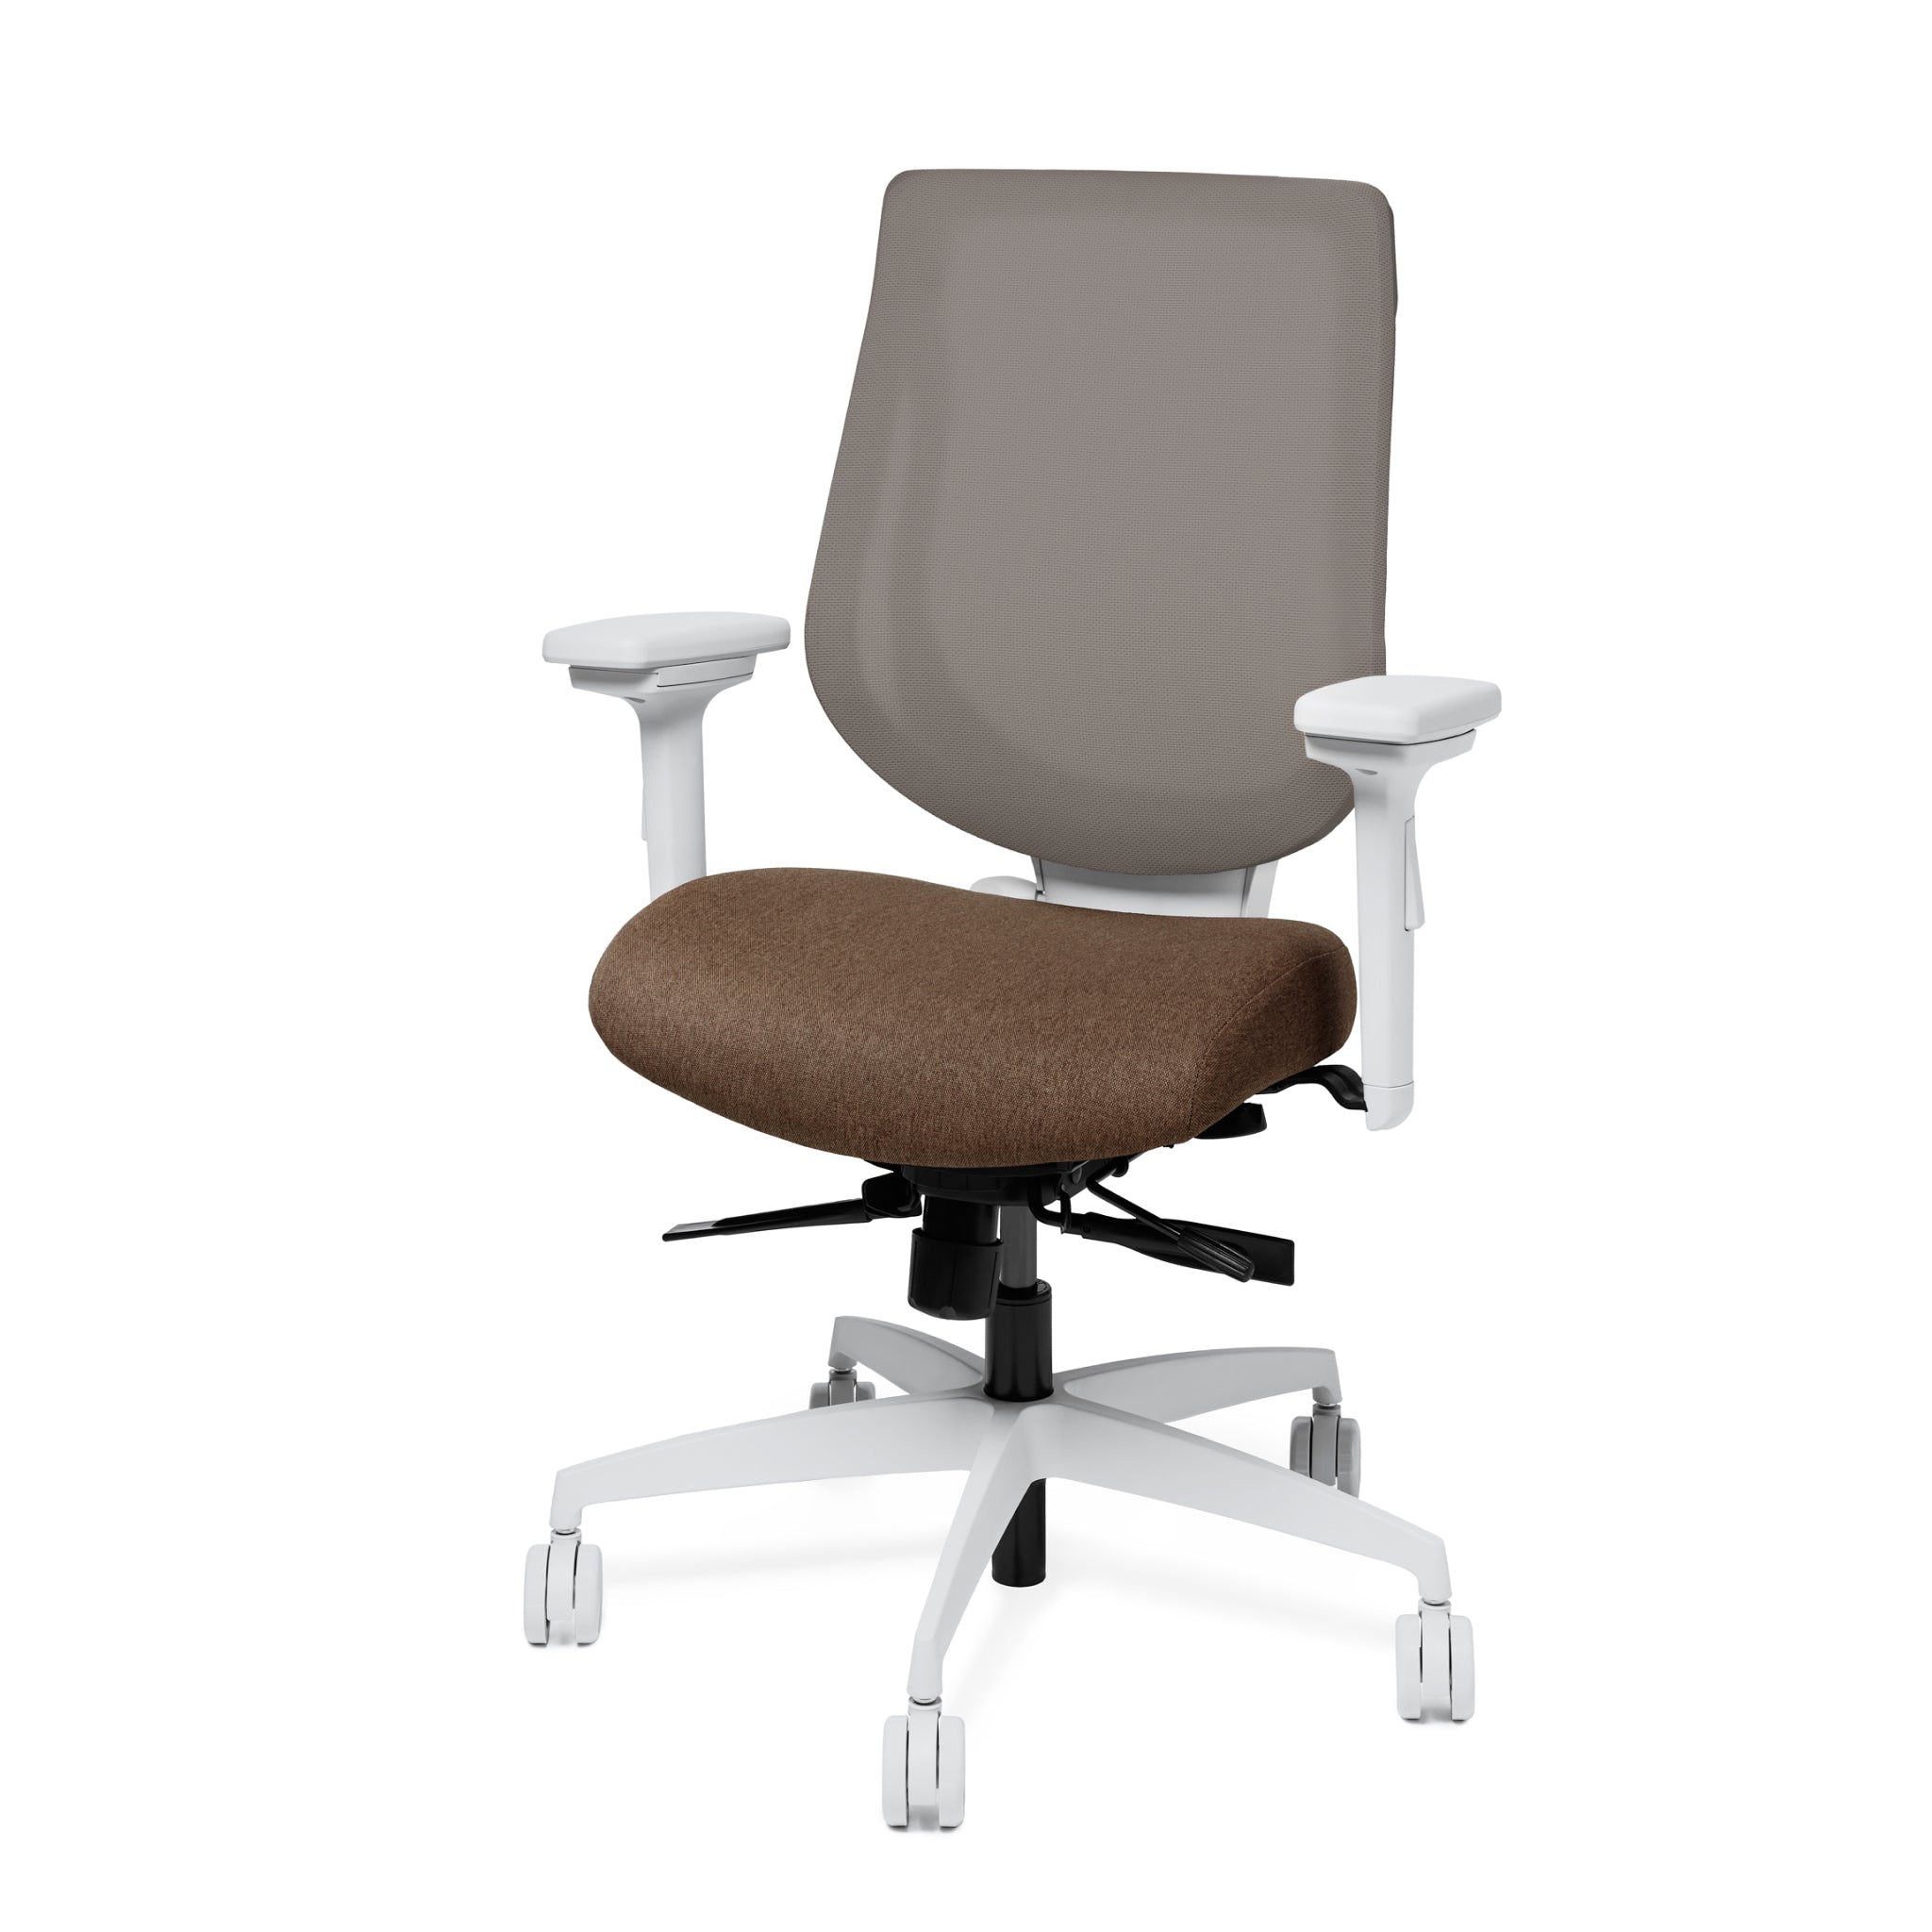  Small YouToo Ergonomic Chair - Ash/Almond – Clay